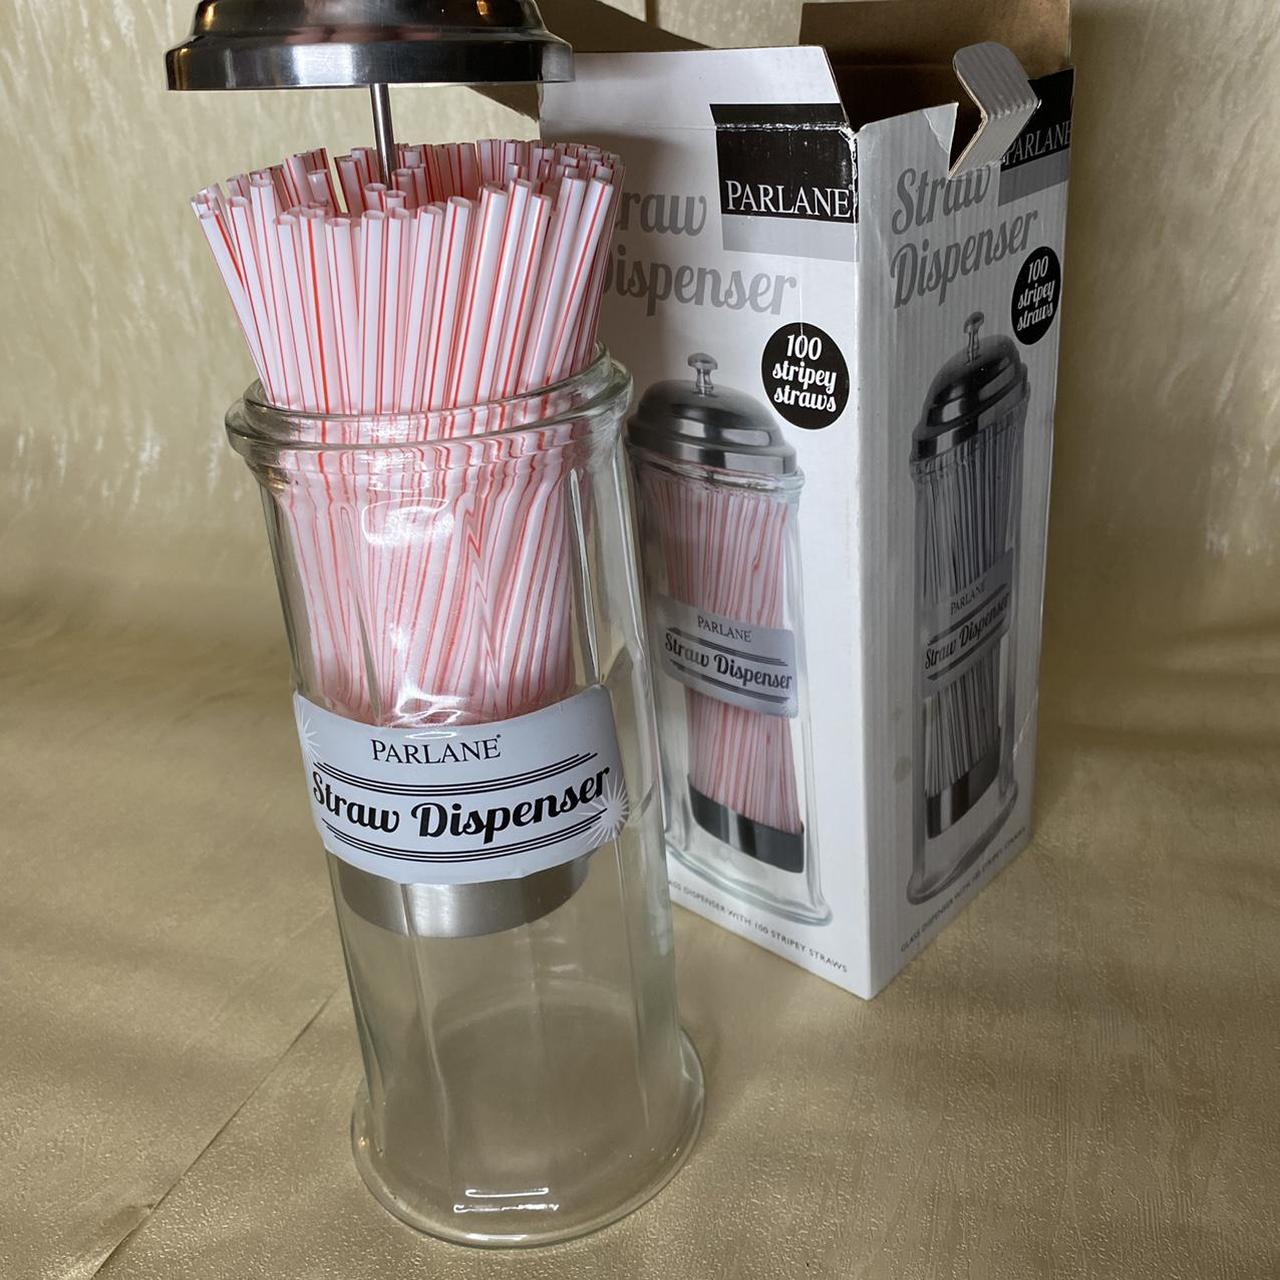 Product Image 2 - 🎄 Christmas Gifts 🎄

Straw dispenser.